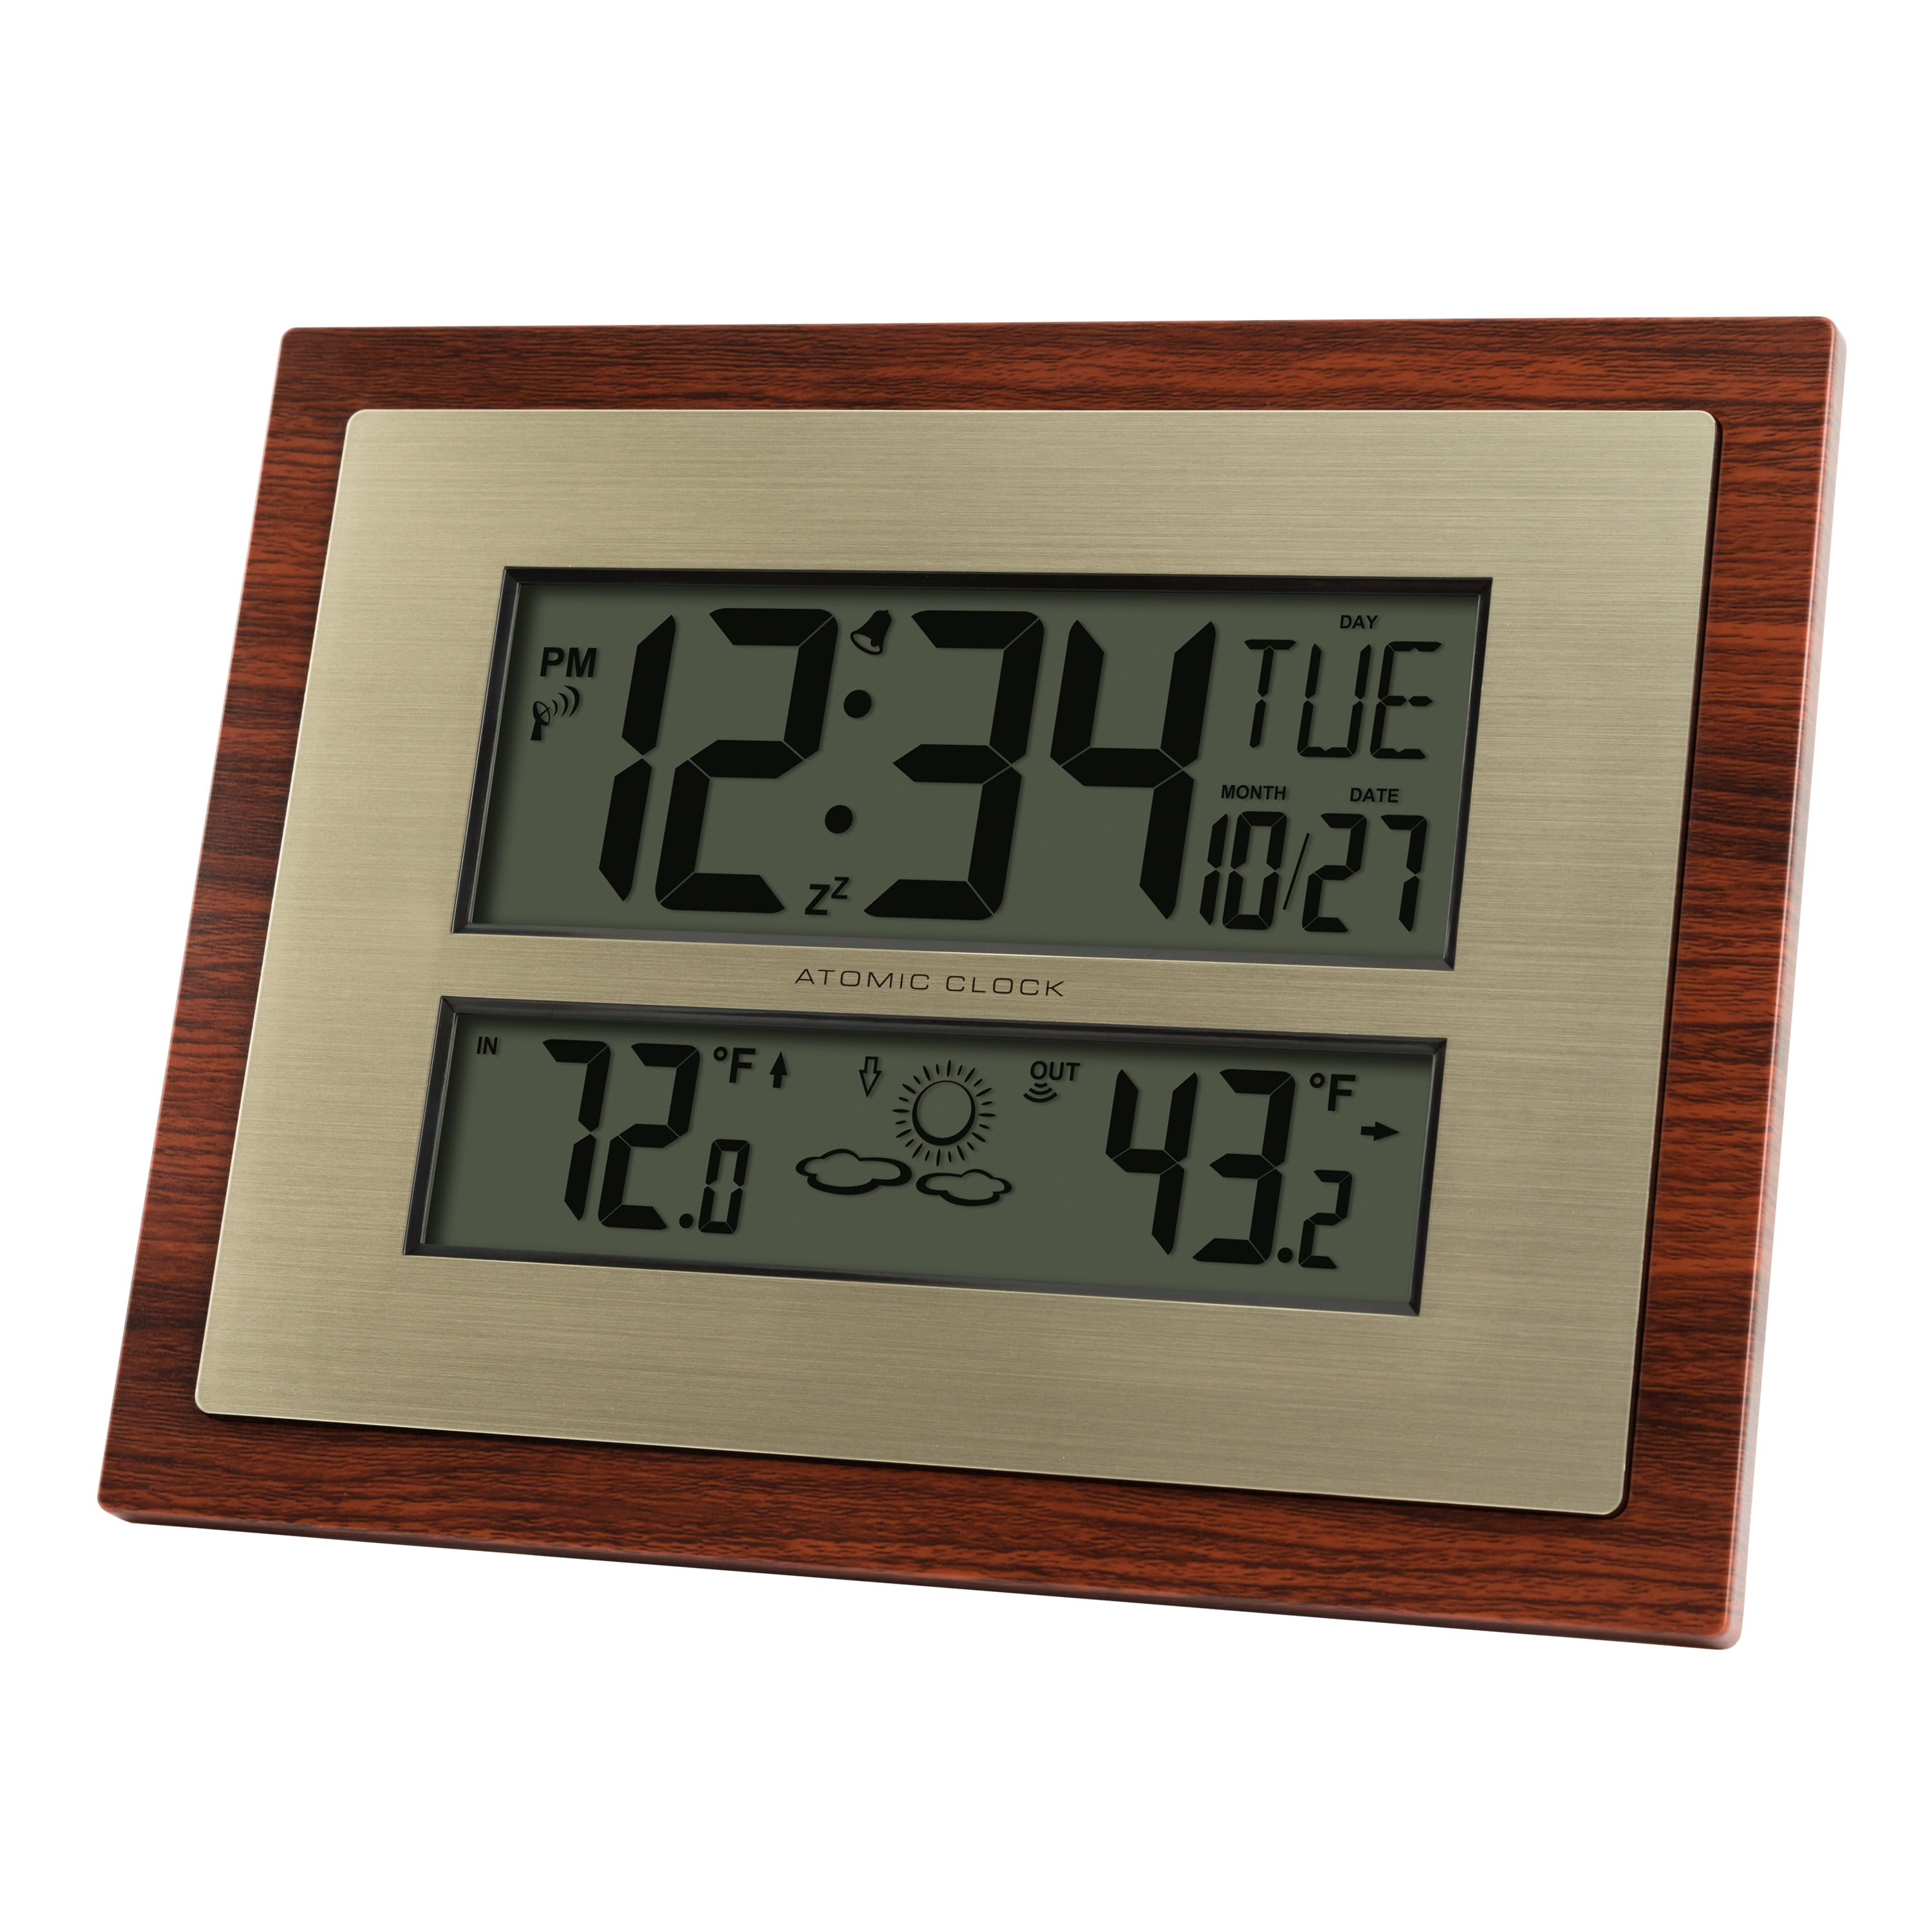 Better homes and gardens 28 wall clock oil rubbed bronze Better Homes Gardens Atomic Digital Clock With Moon Phase And Outdoor Temperature W86111 Walmart Com Walmart Com